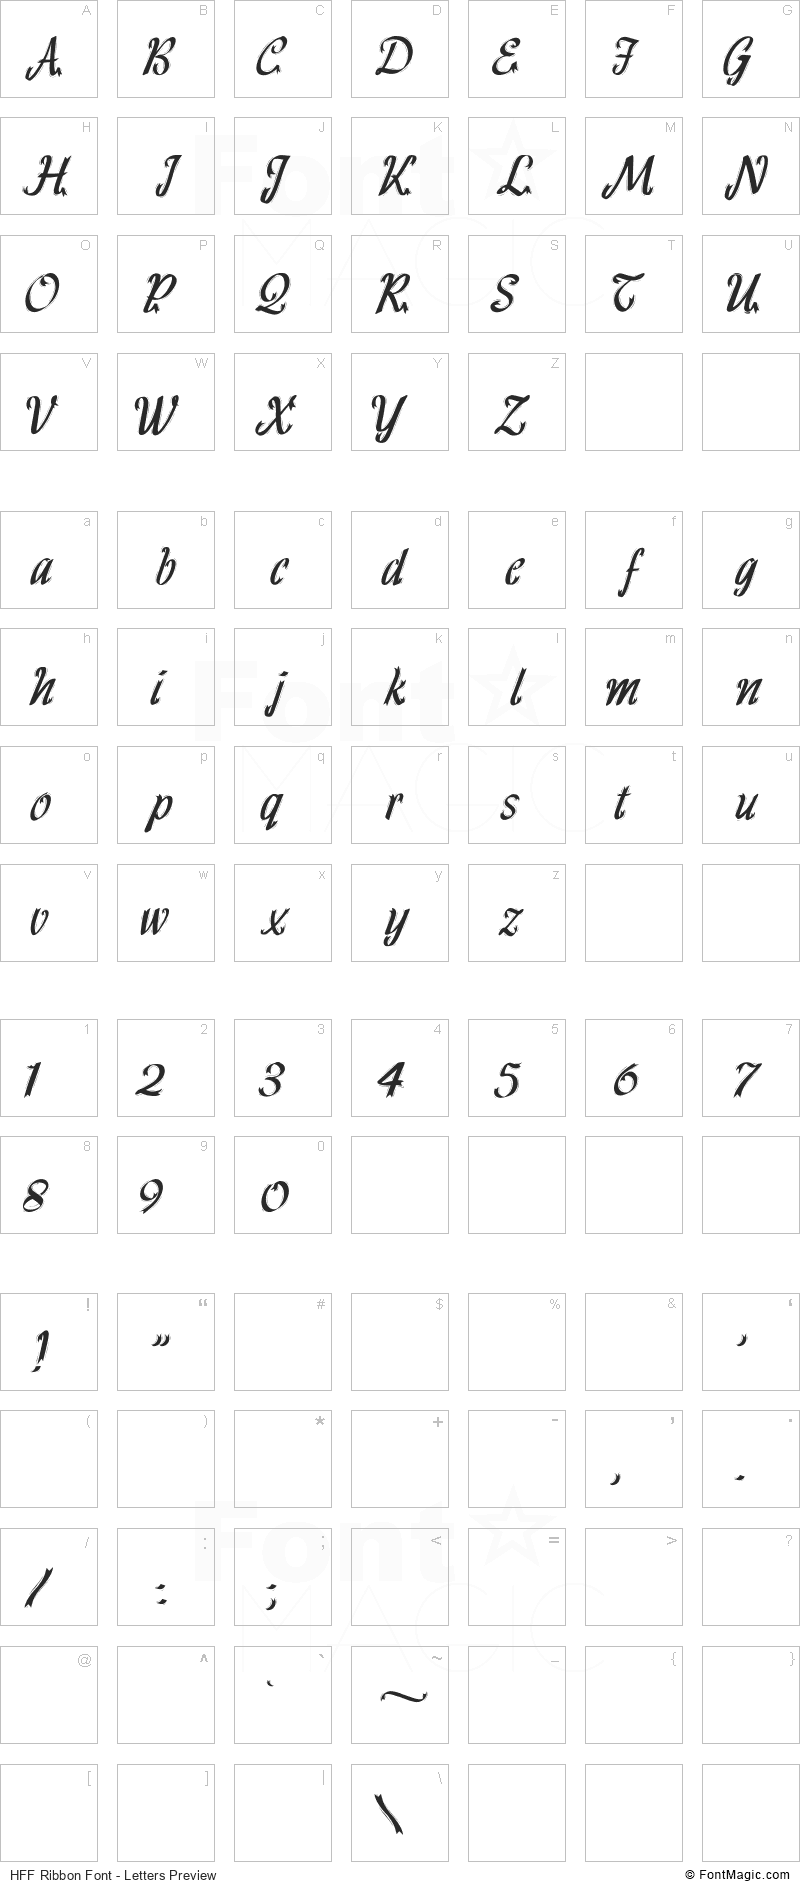 HFF Ribbon Font - All Latters Preview Chart